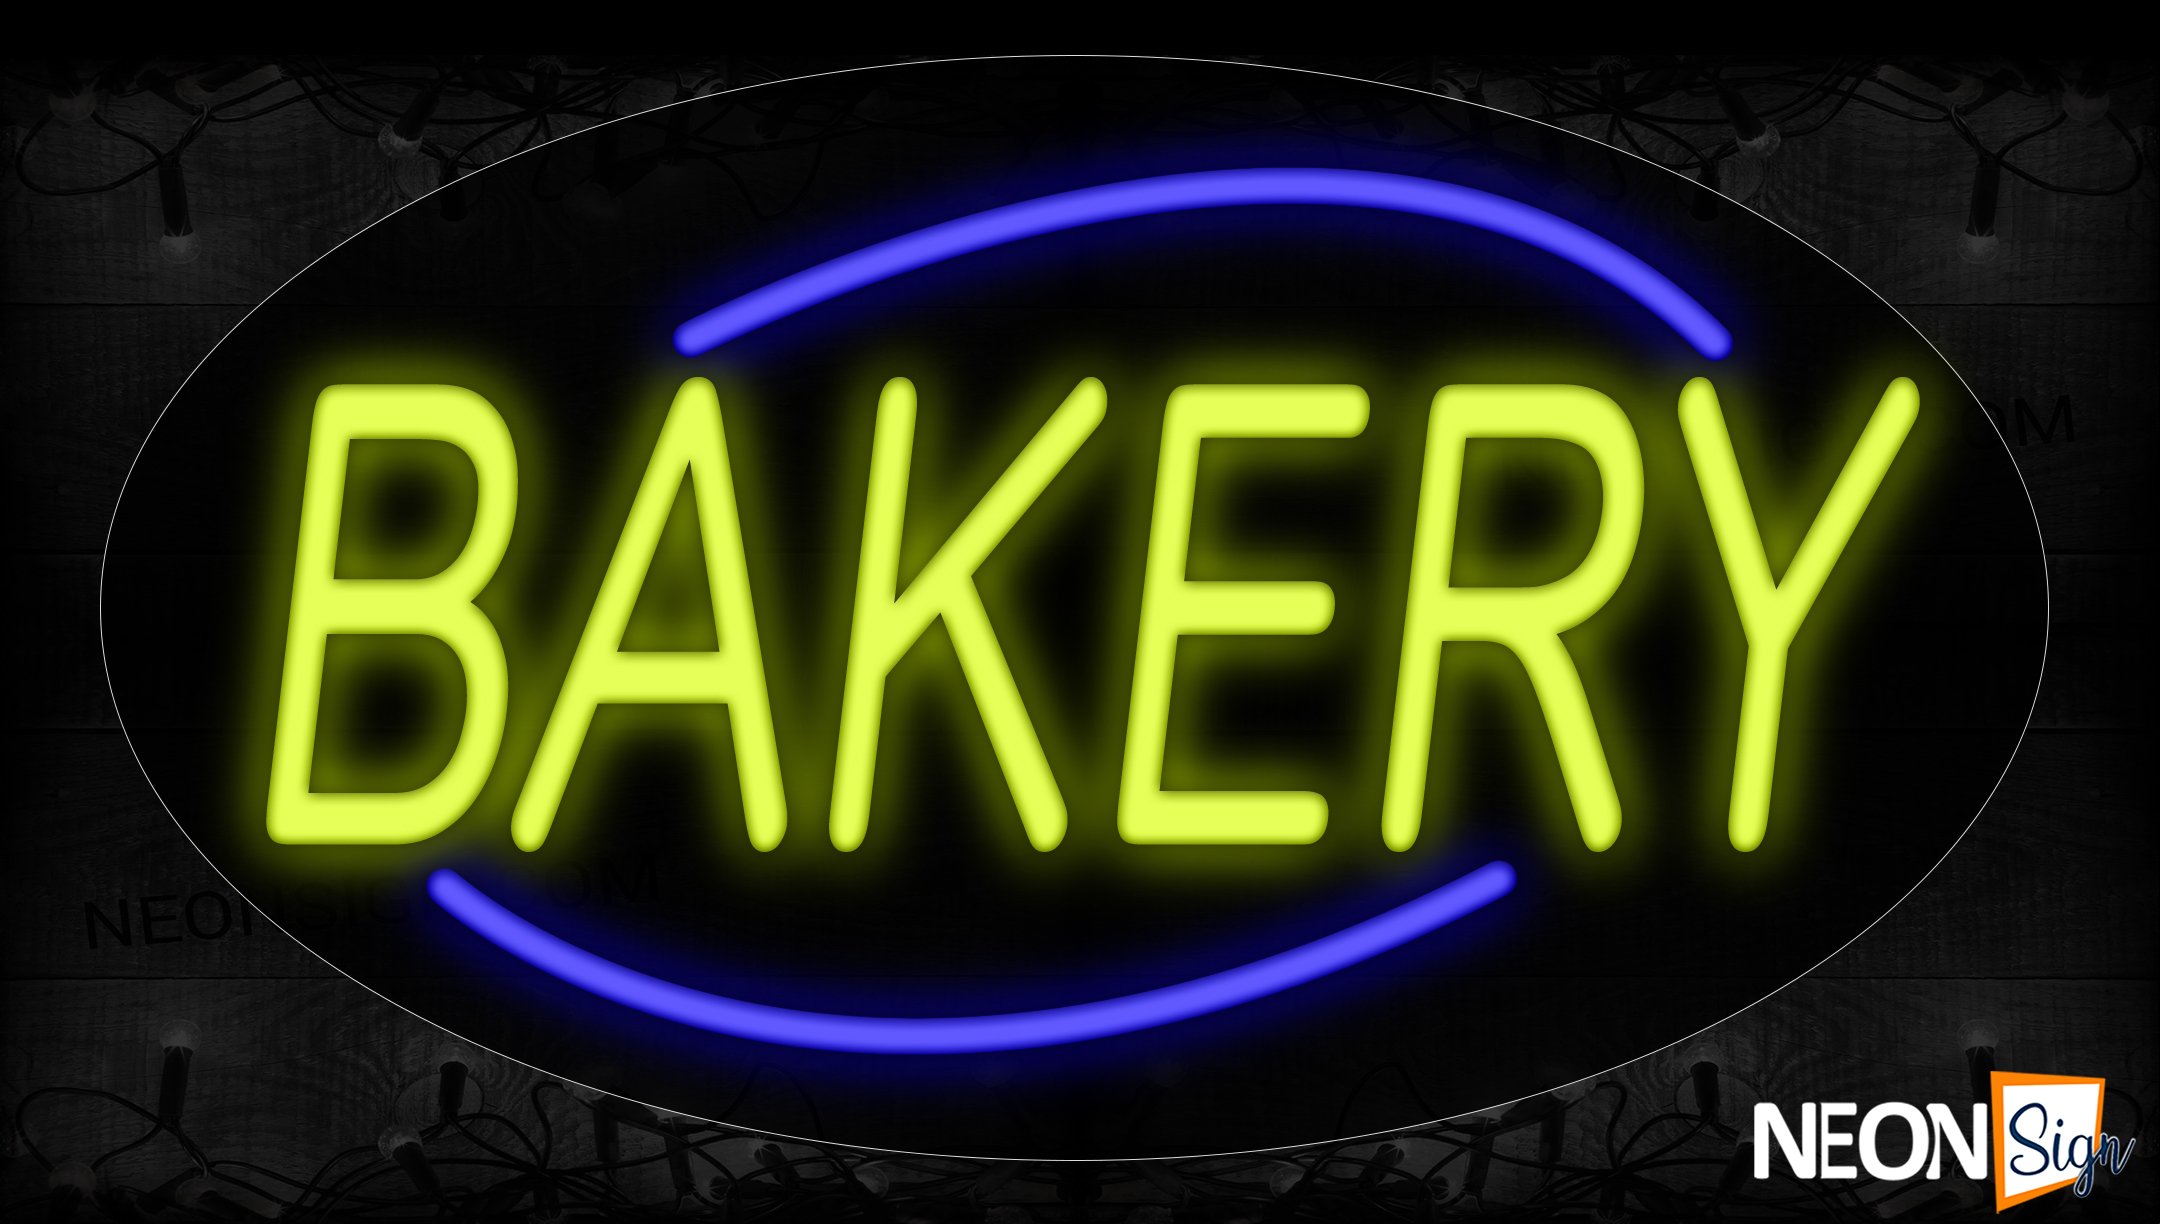 Image of 14147 Bakery With Arc Border Neon Signs_17x30 Contoured Black Backing